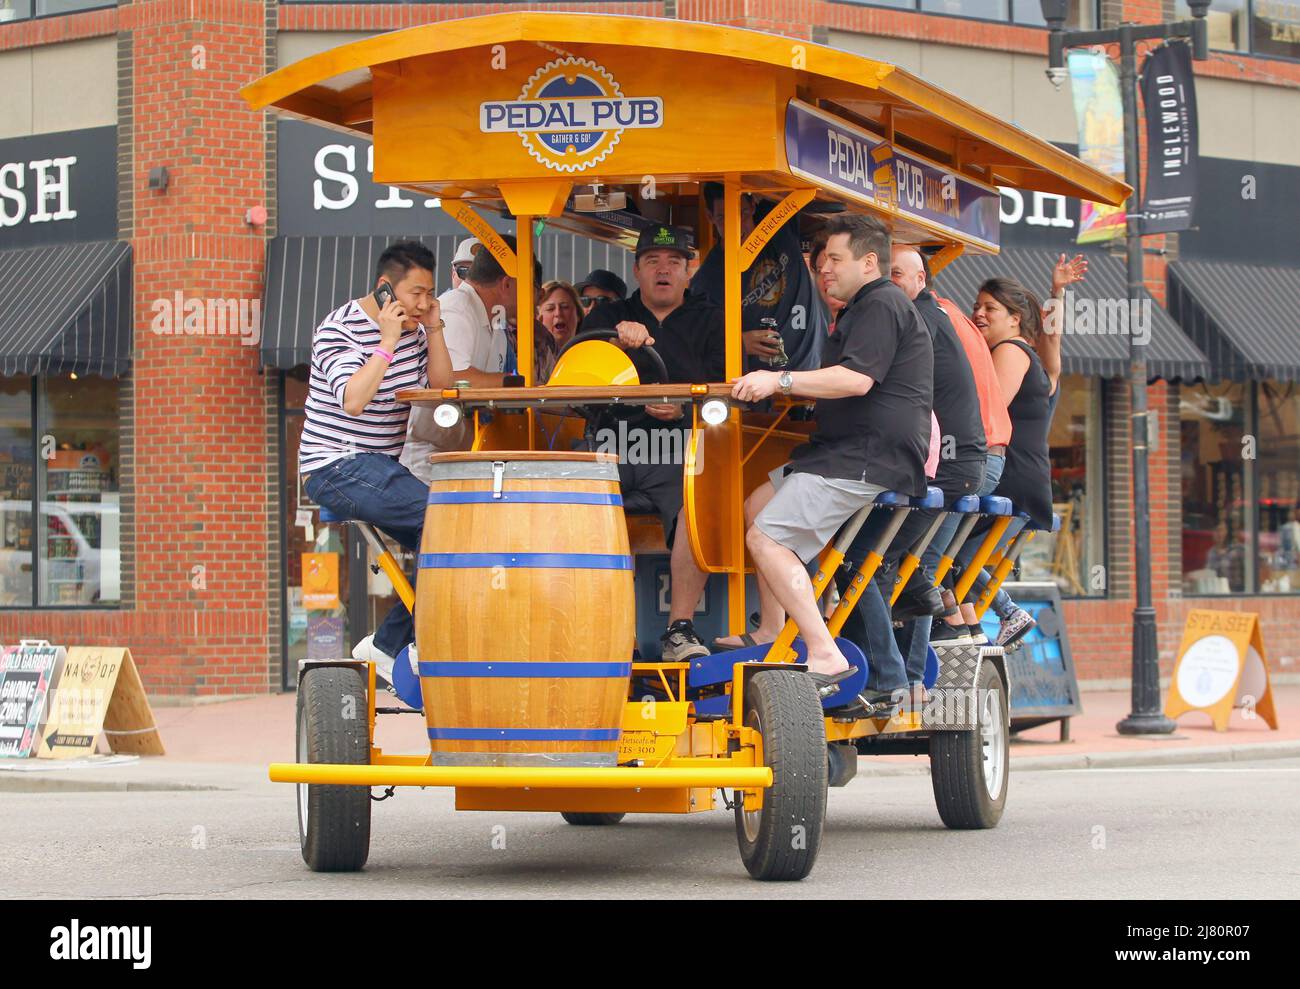 People enjoy a drink on a Pedal Pub, a mobile bar powered by it's patrons in Inglewood in Calgary, Alberta Canada. Stock Photo